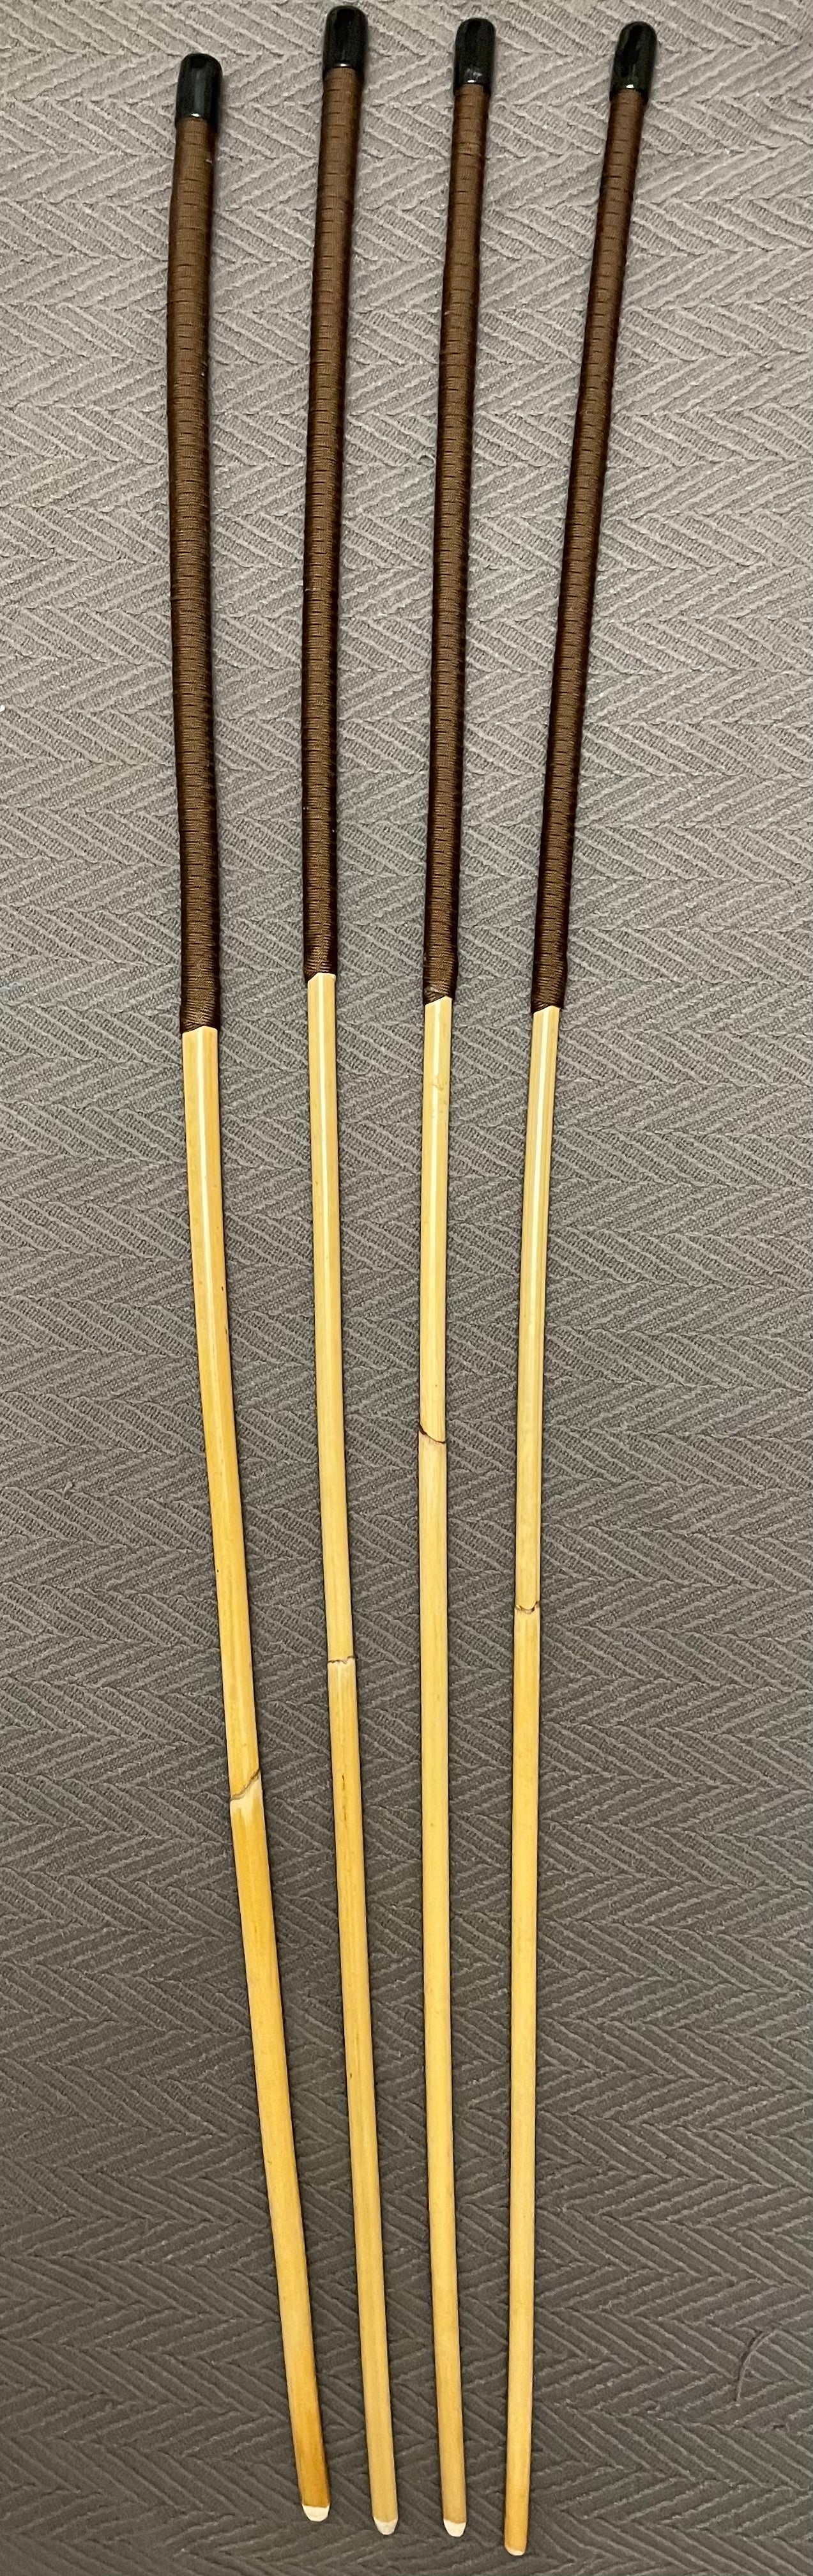 Set of 4 Very Whippy and Stingy Classic Dragon Canes - 95 cms Length - Brown Paracord Handles